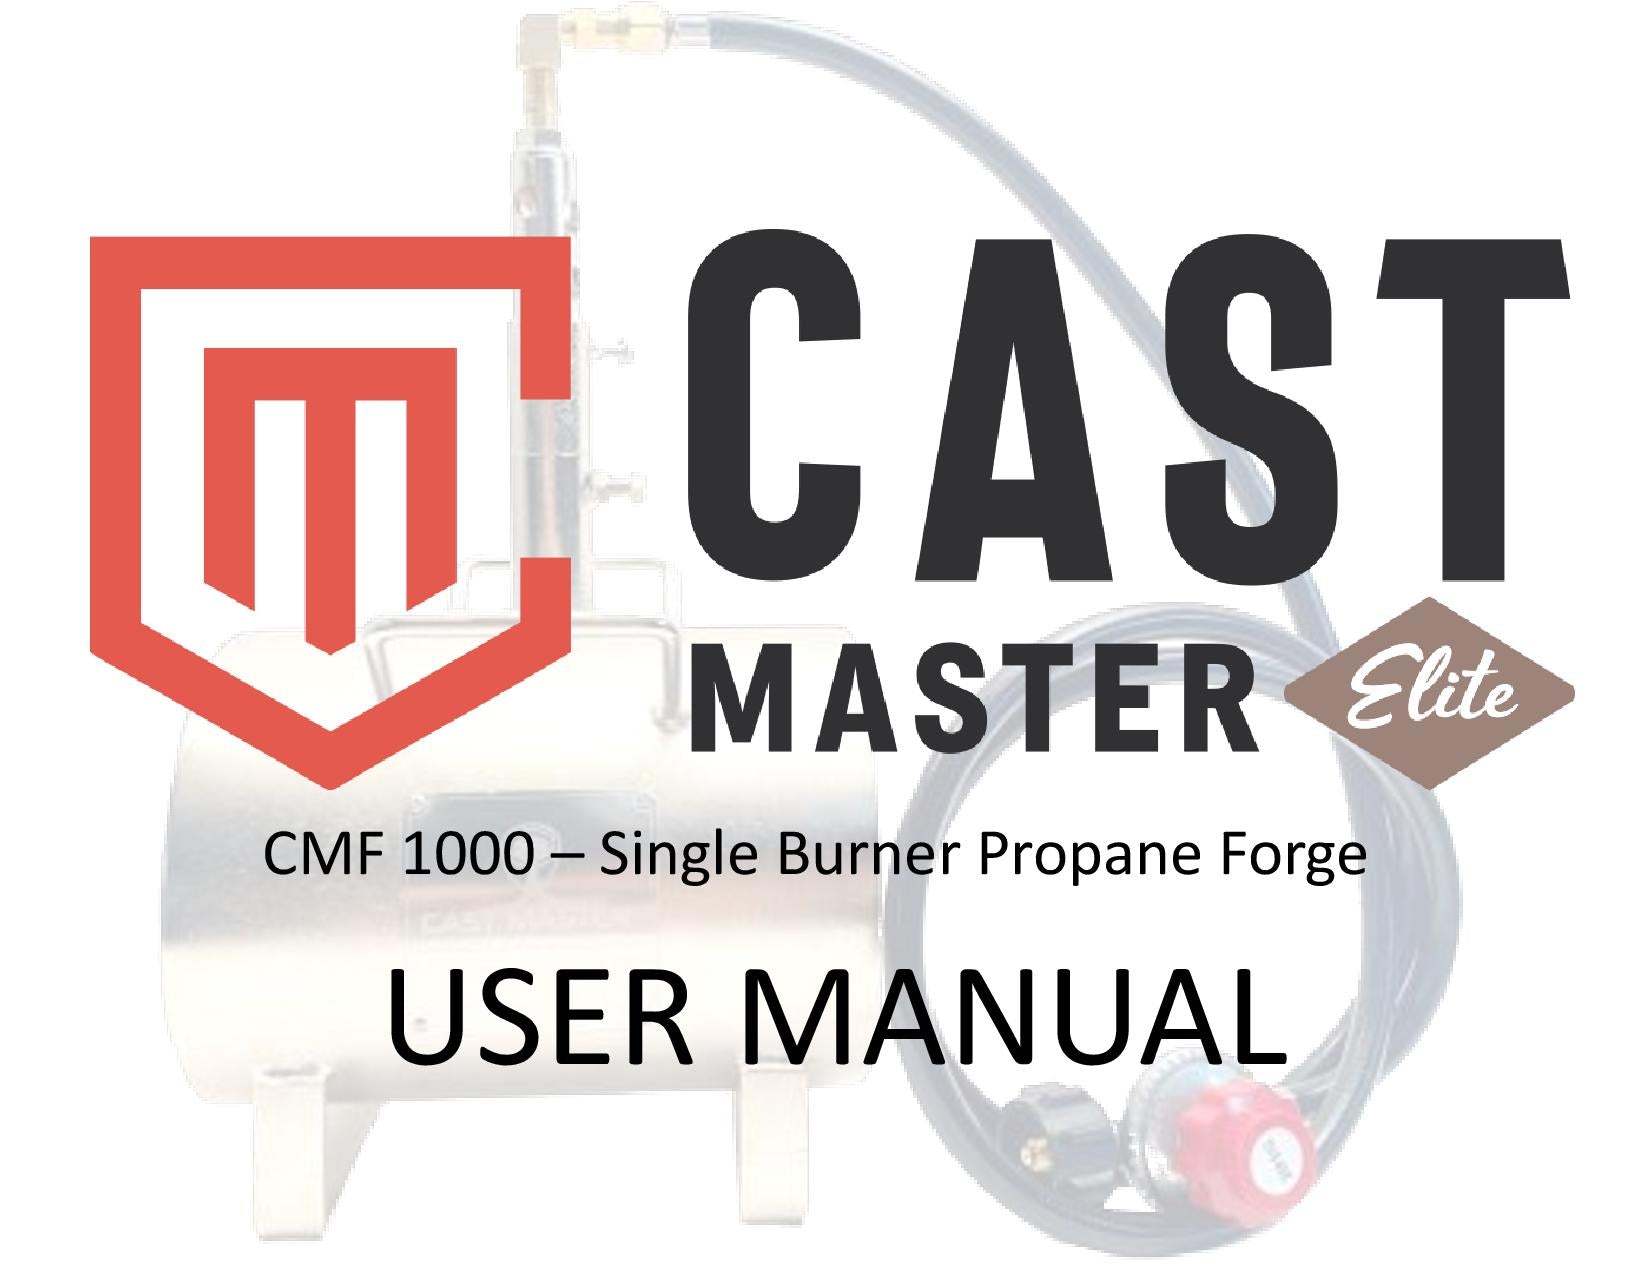  USA Cast Master Elite Portable Double Burner Propane Forge  Blacksmith Farrier Caster Deluxe KIT Jewelry Large Capacity Knife and Tool  Making : Arts, Crafts & Sewing